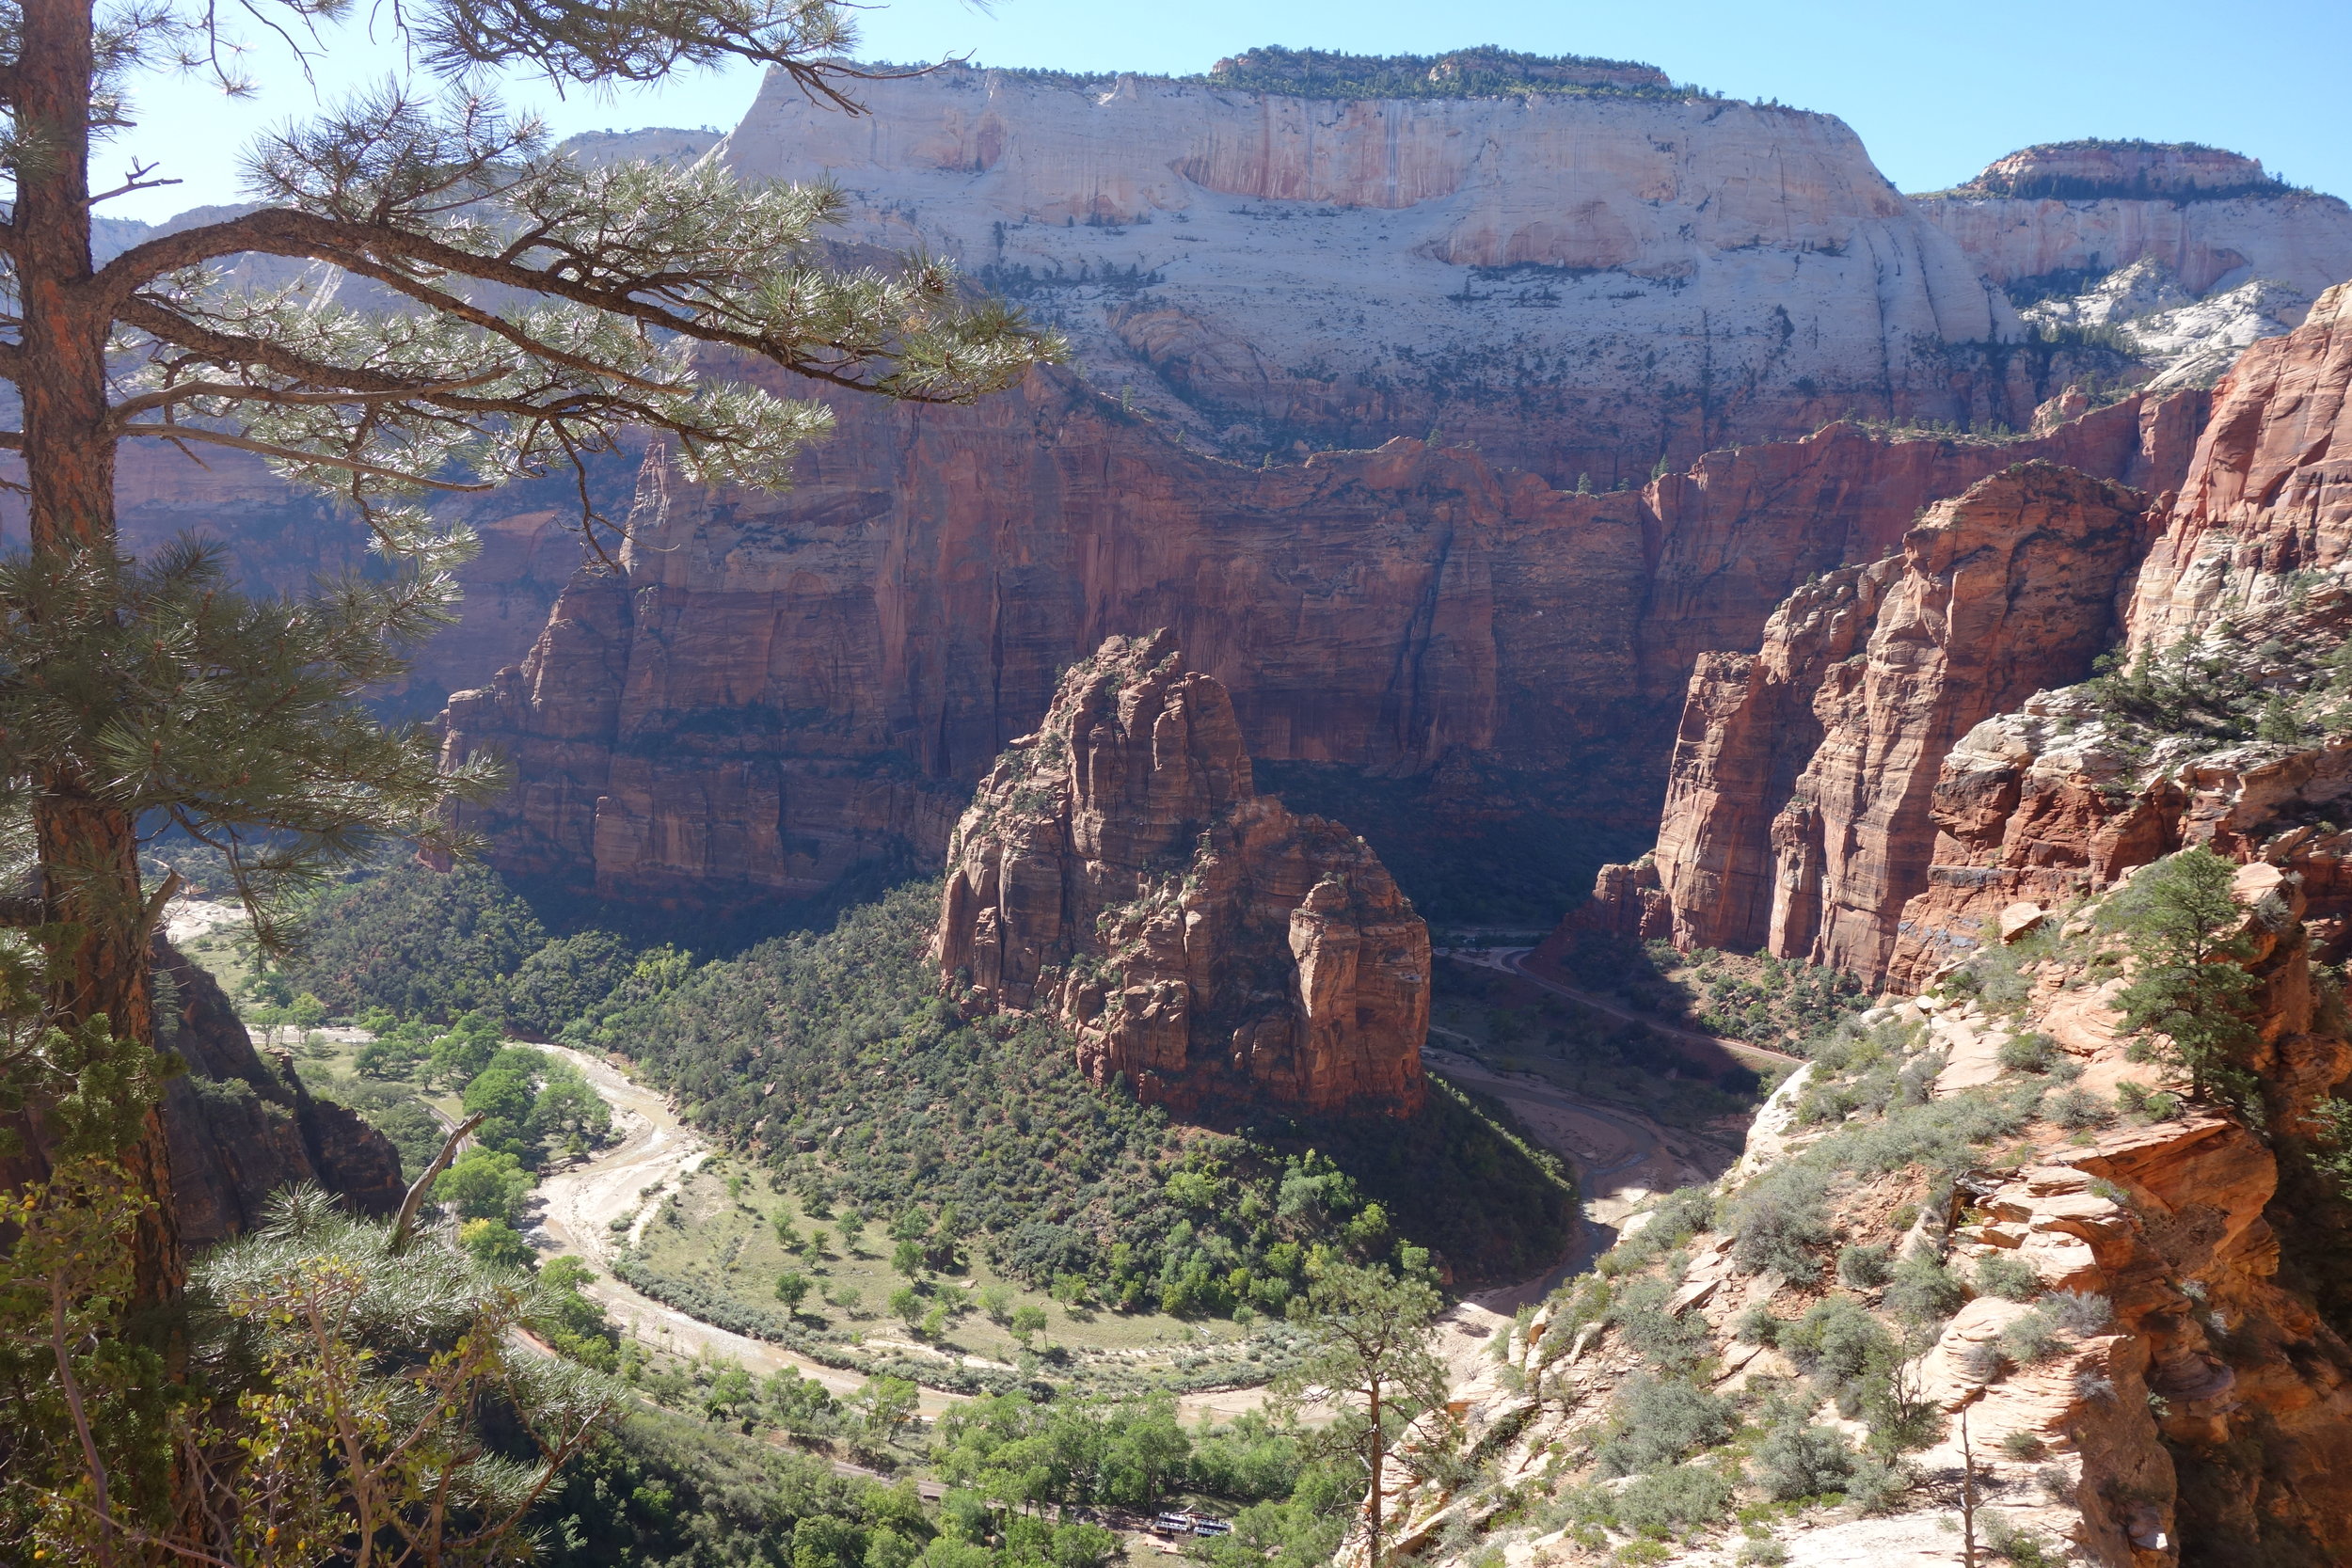 The descent along the Observation Point Trail opens to sweeping views of stunning Zion Canyon.